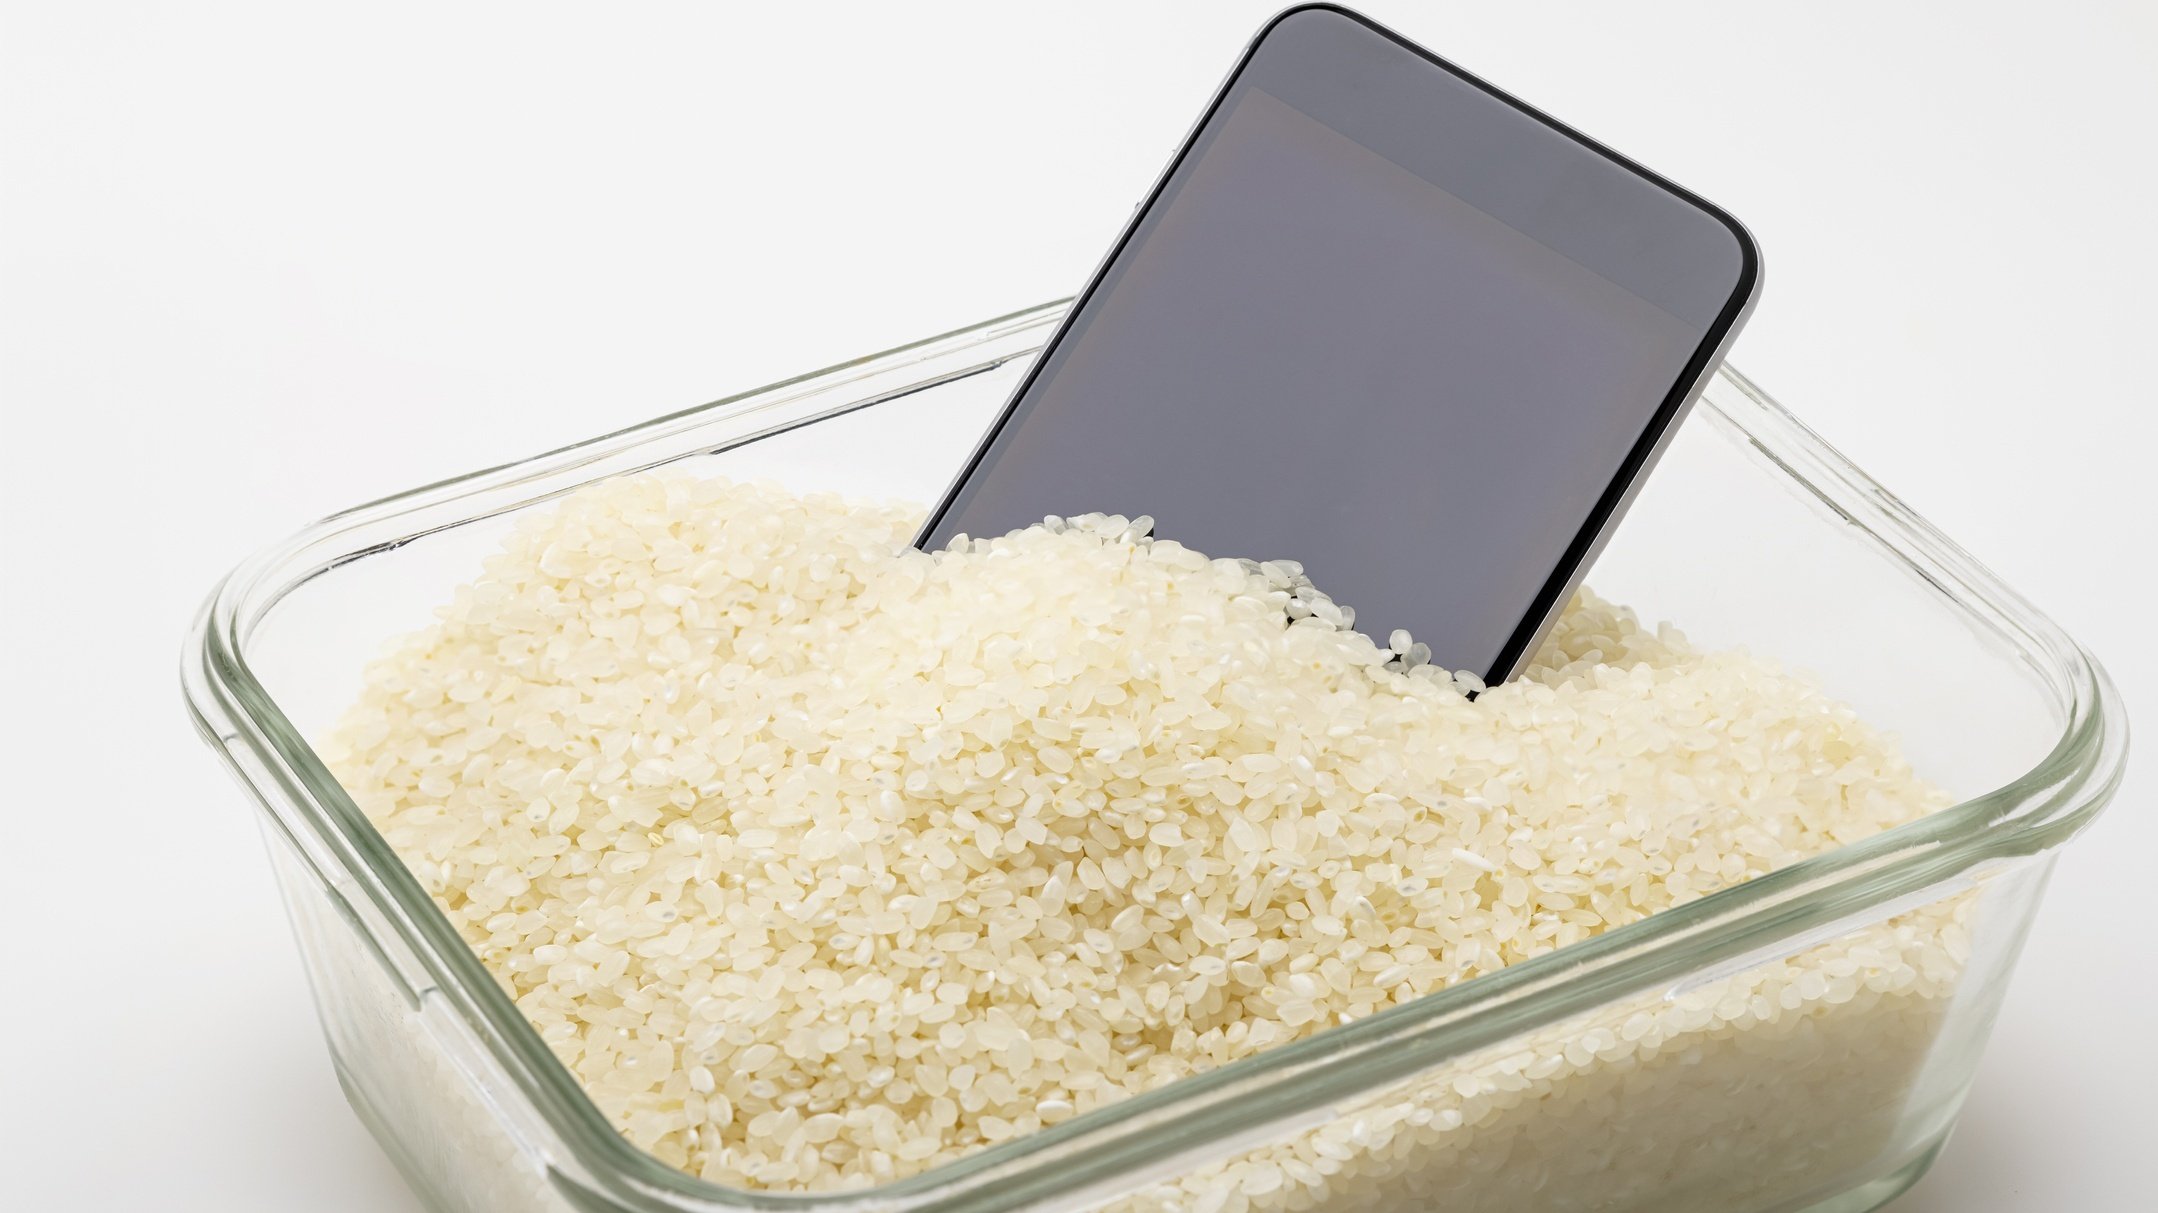 Dead phone inside a bowl of rice